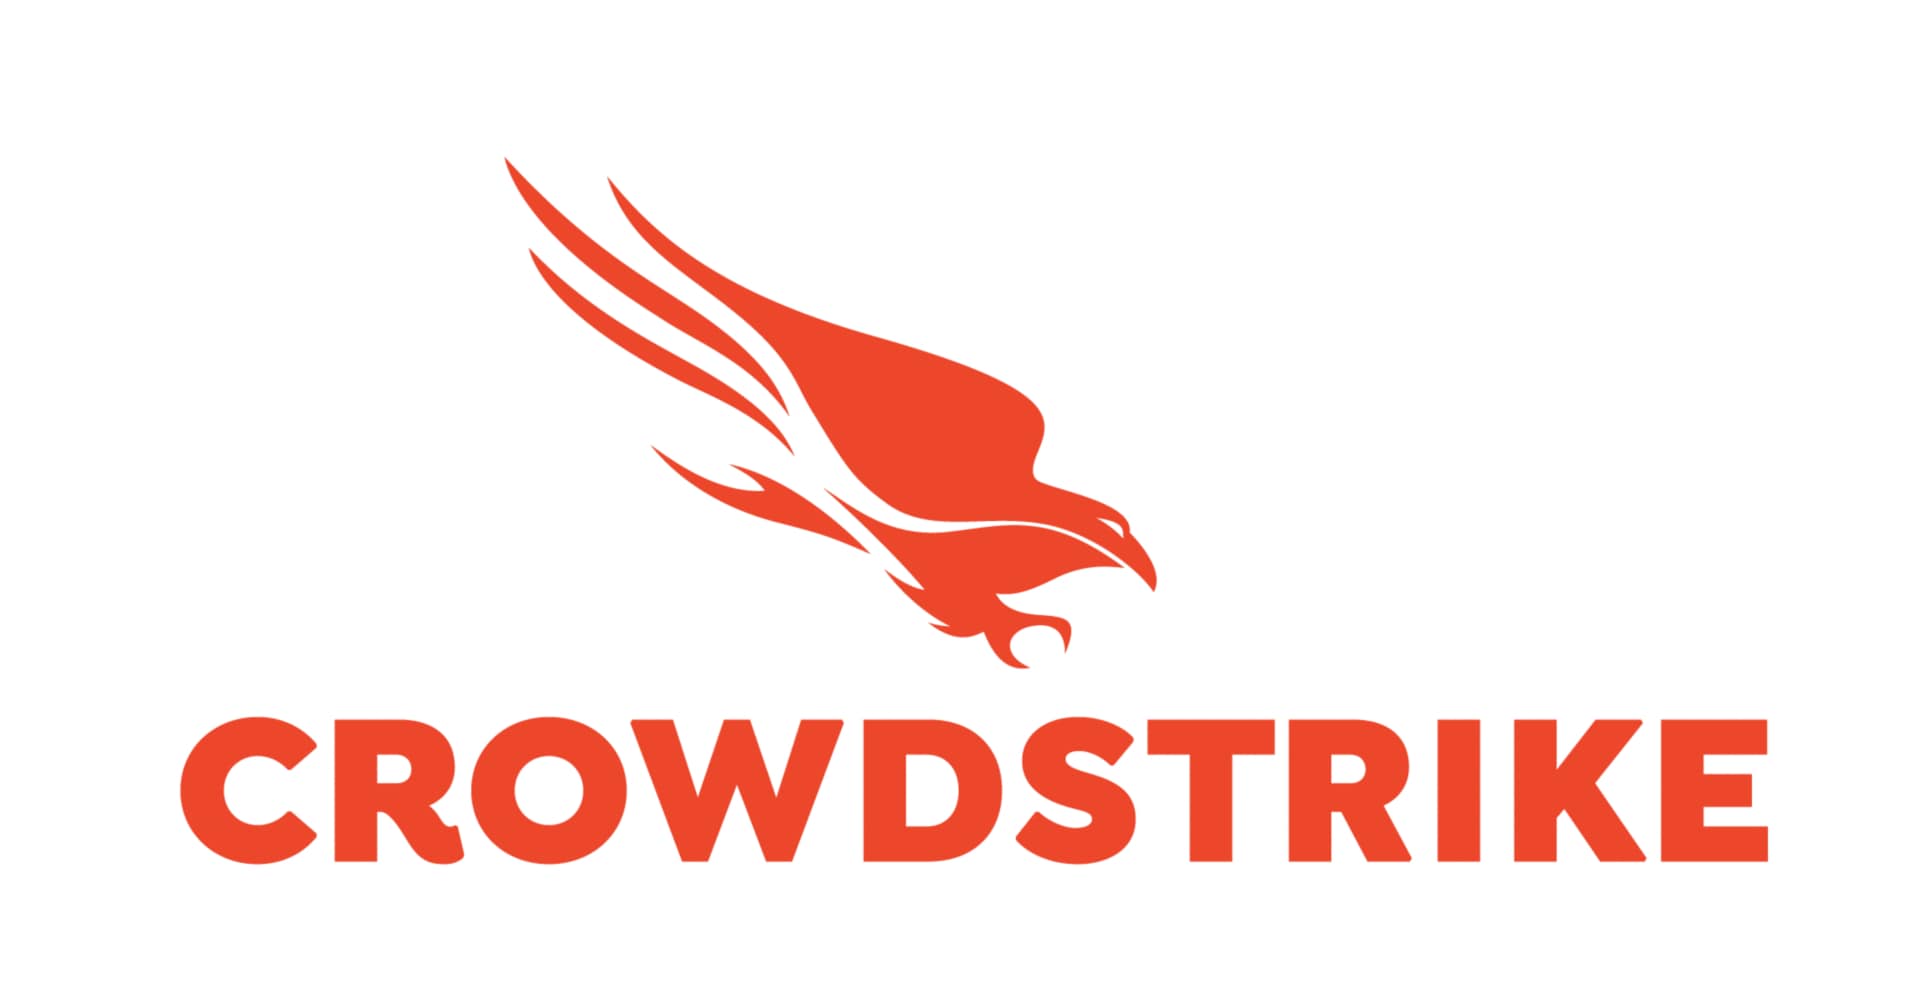 CrowdStrike 2-Month Falcon Insight (EDR) Application Software Subscription